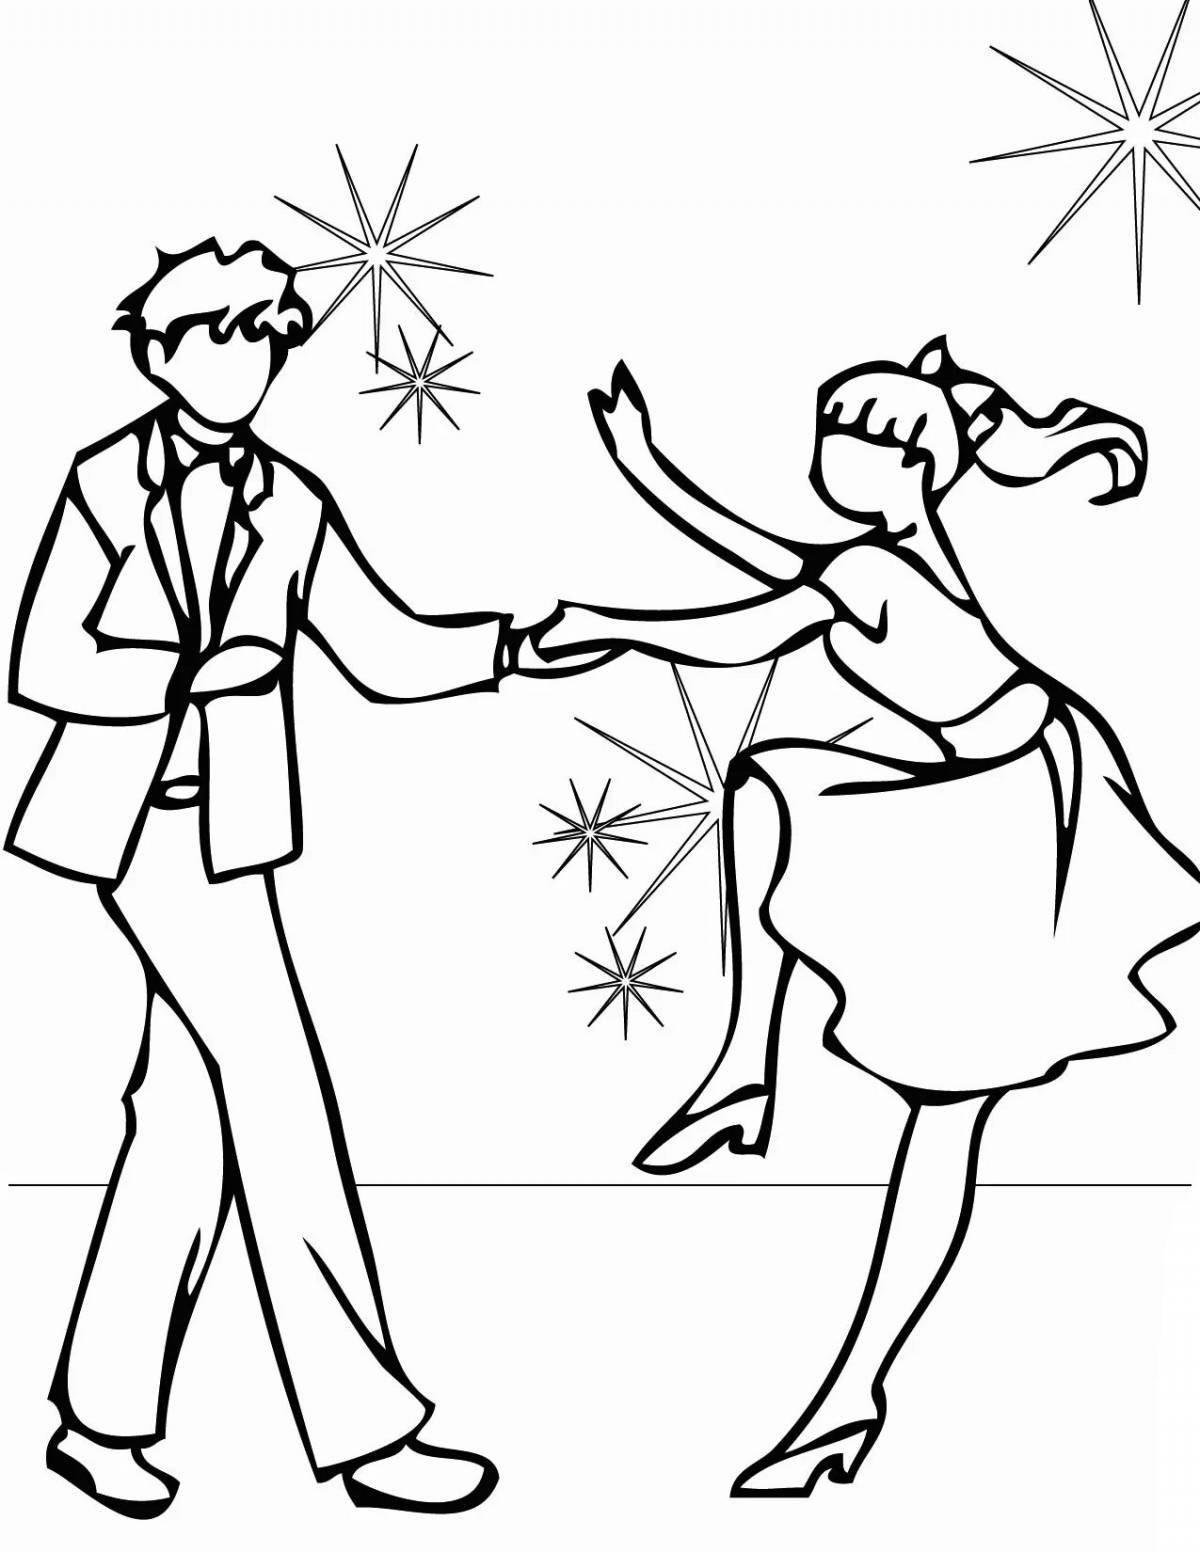 Coloring page bewitching dancer